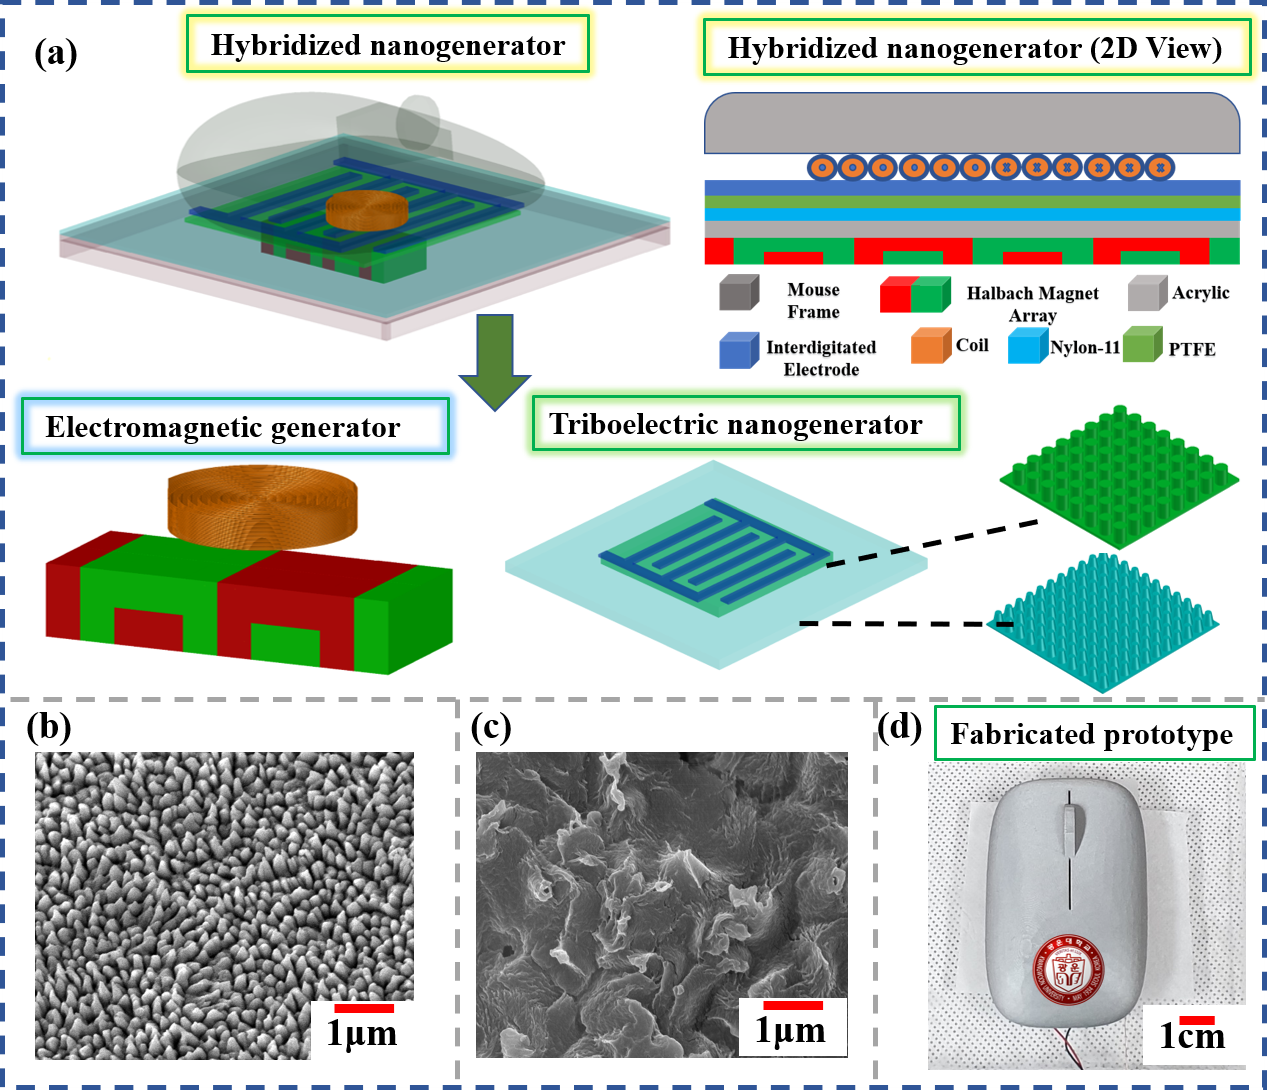 A human-machine interactive hybridized biomechanical nanogenerator as a self-sustainable power source for multifunctional smart electronics applications